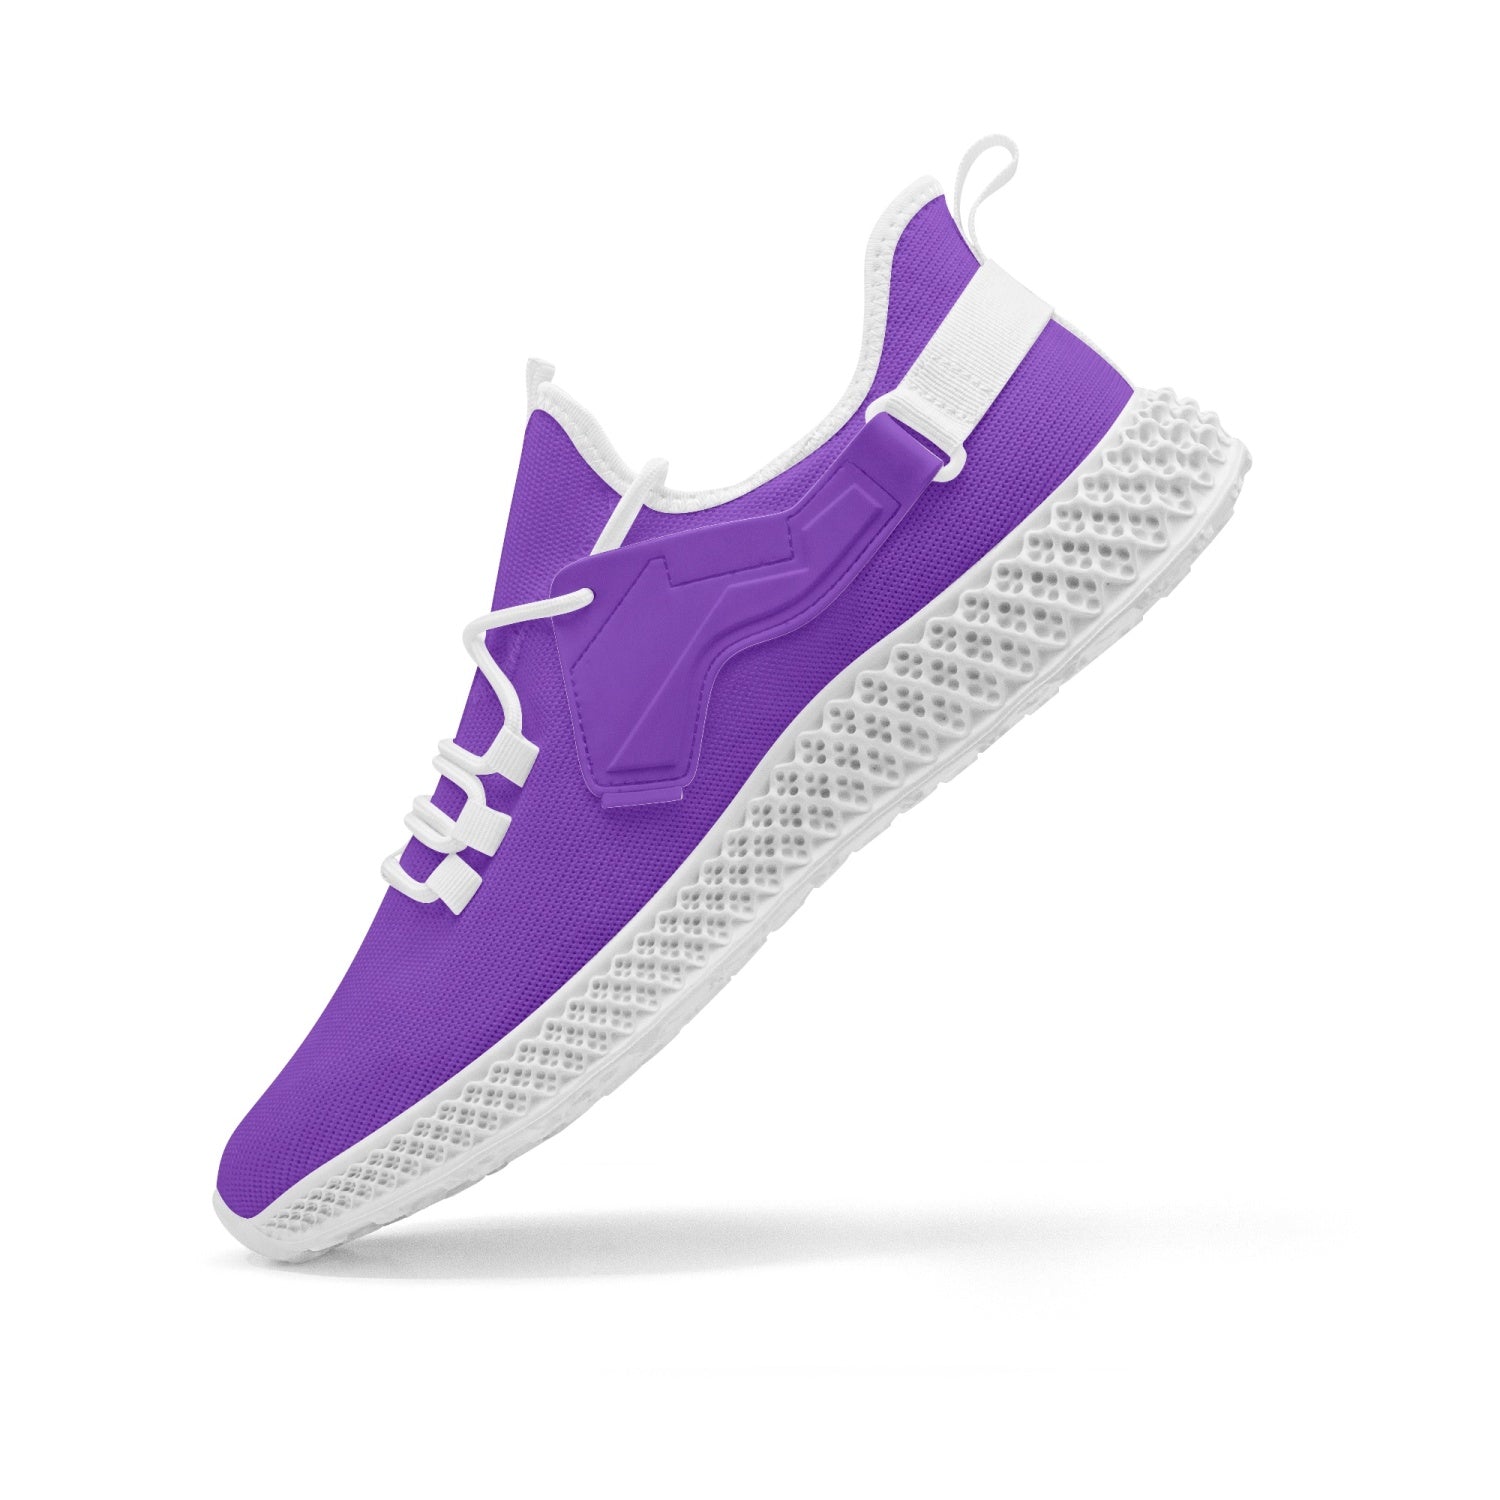 Unisex Net Style Mesh Knit Grape Purple Sneakers with Wing Shaped Patches